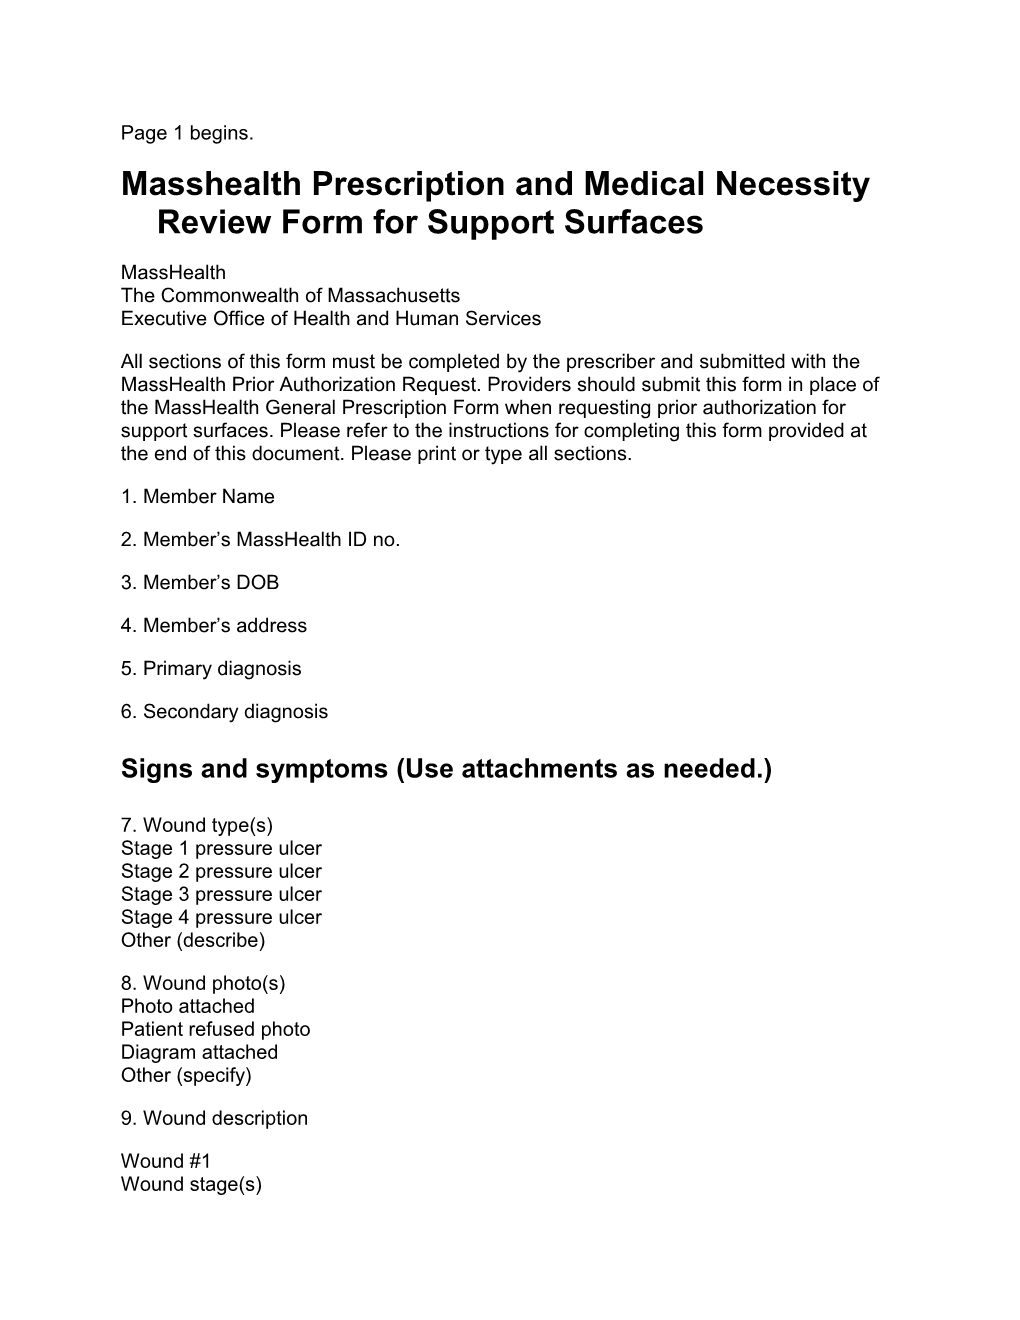 Masshealth Prescription and Medical Necessity Review Form for Support Surfaces